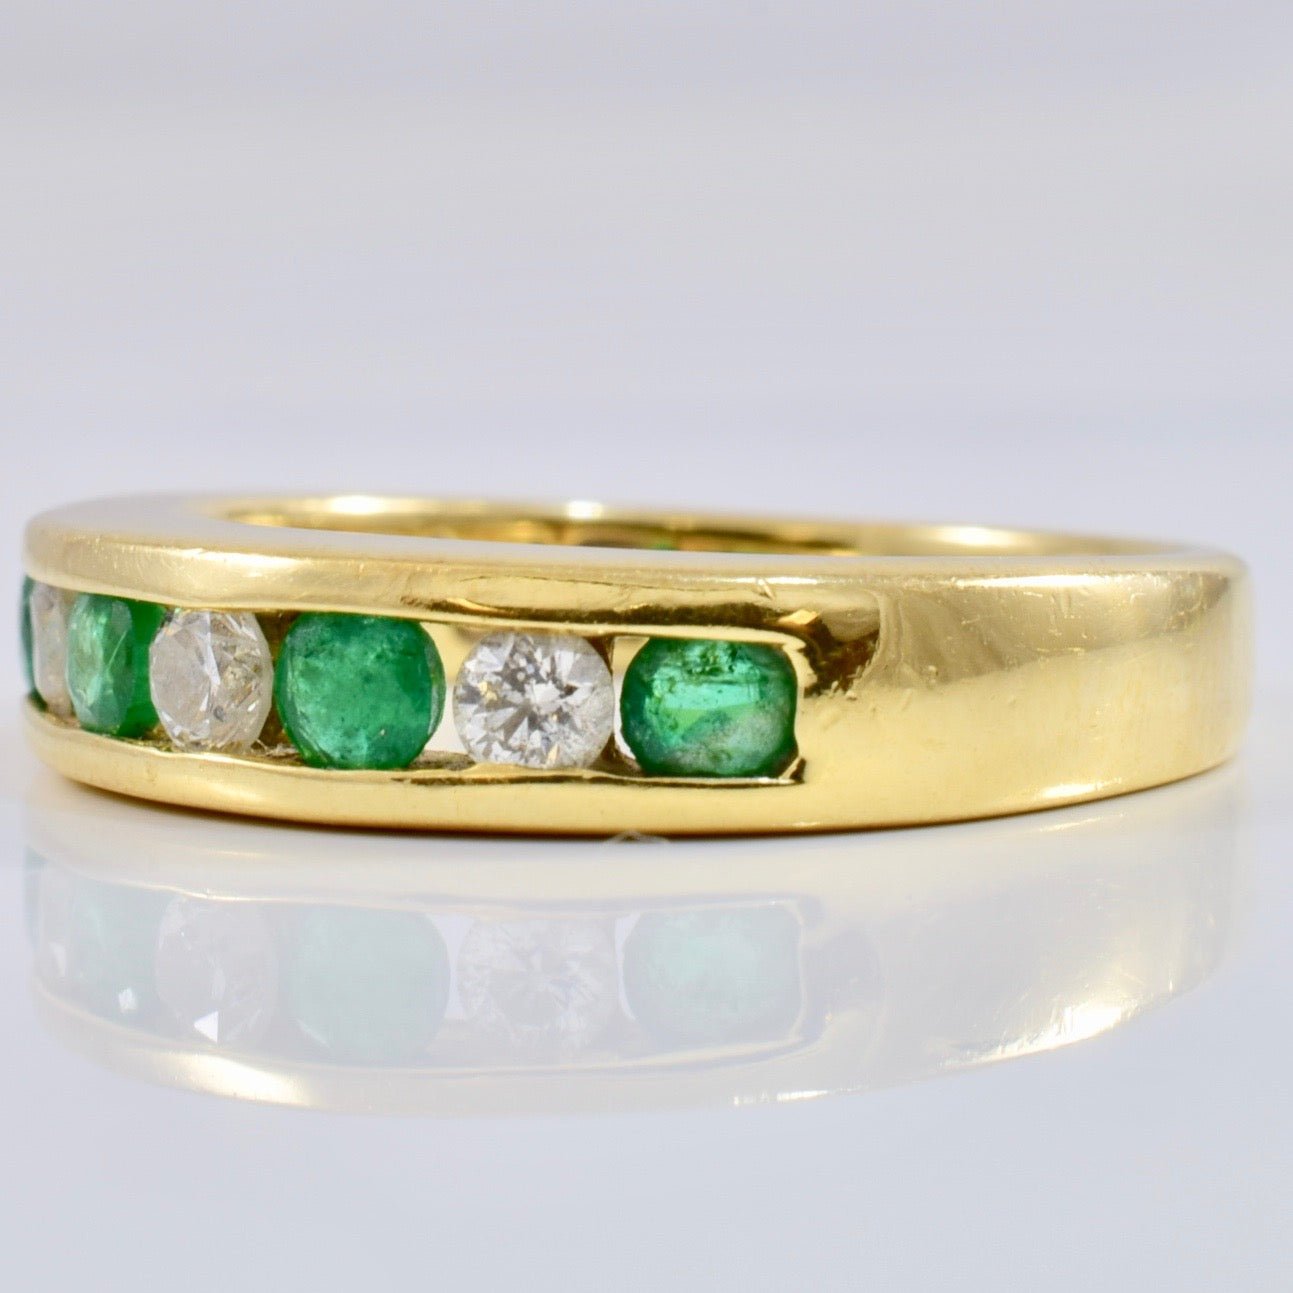 Channel Set Diamond and Emerald Ring | 0.18 ctw SZ 5.75 |